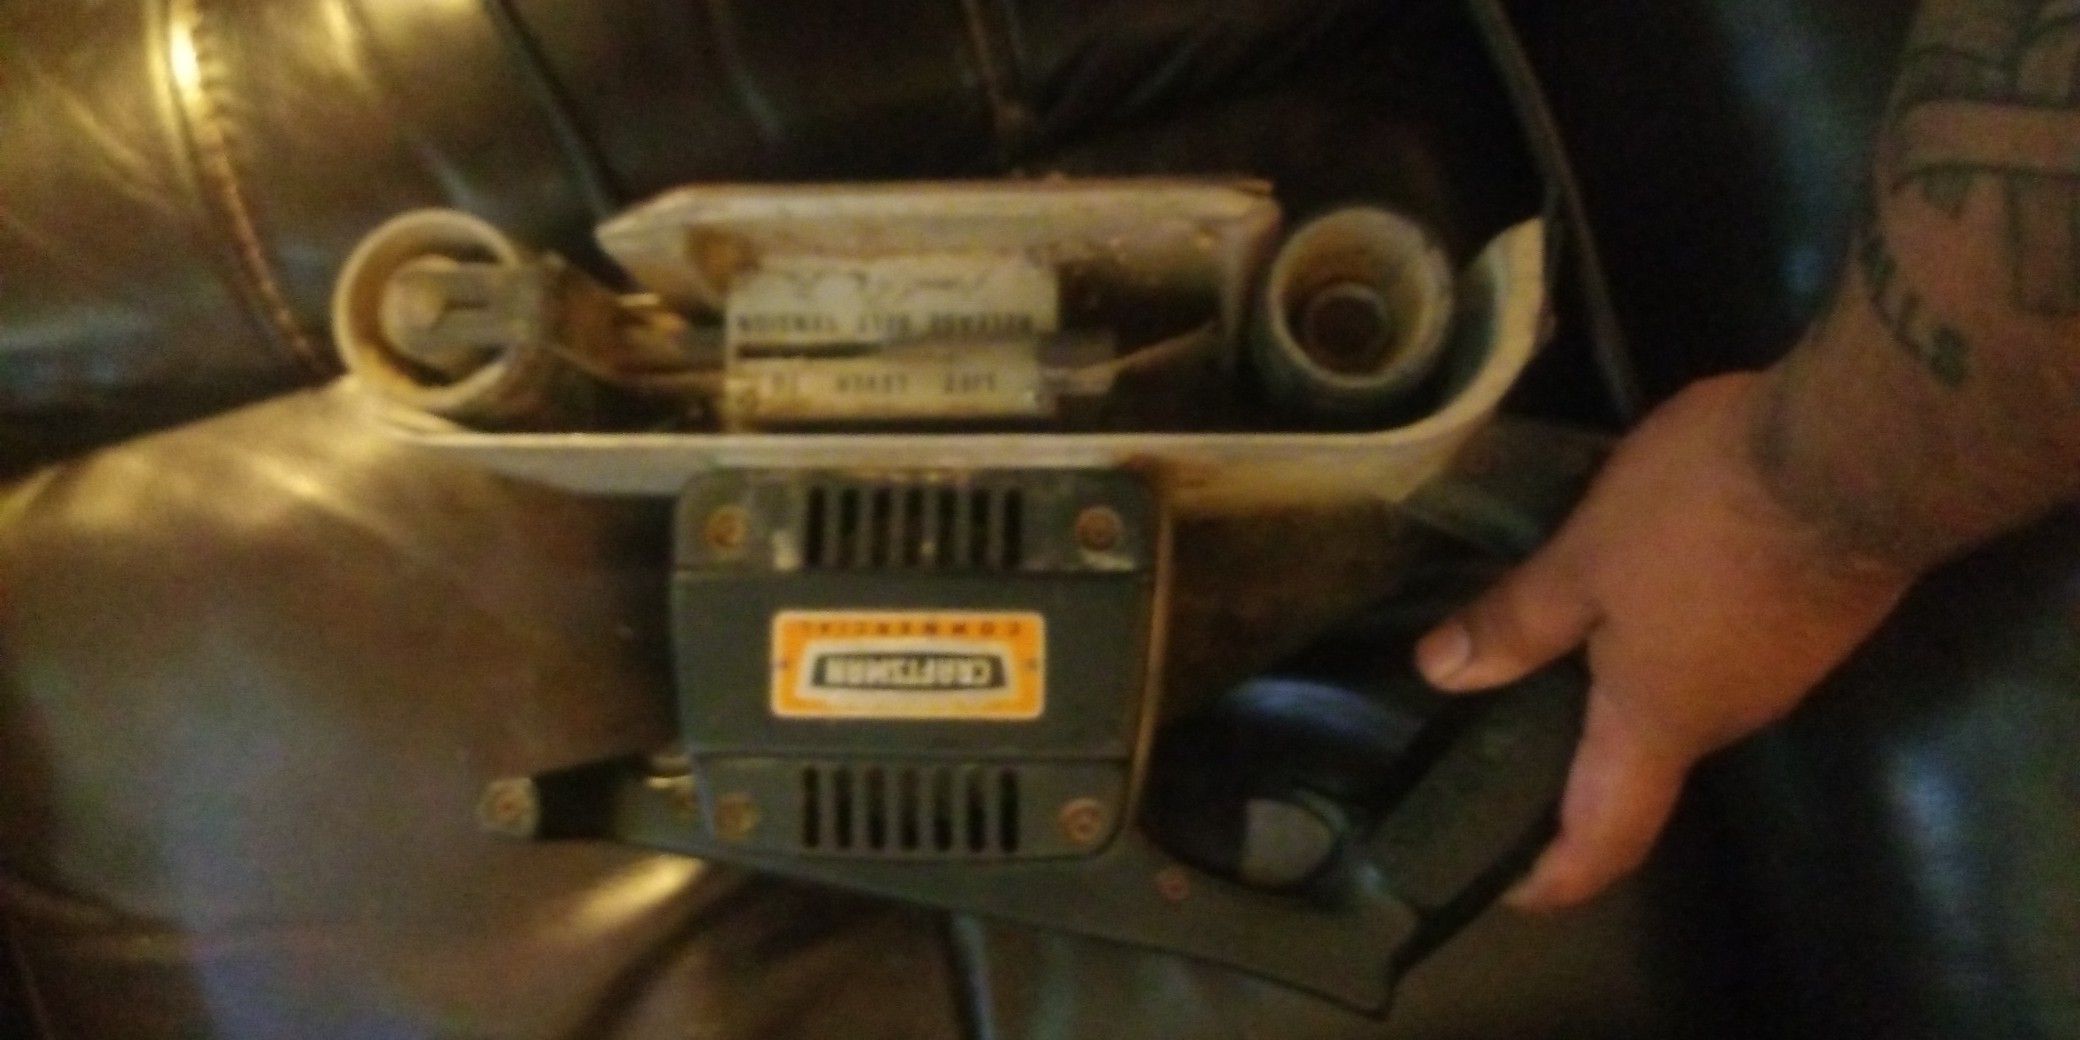 Power tools drill and sander